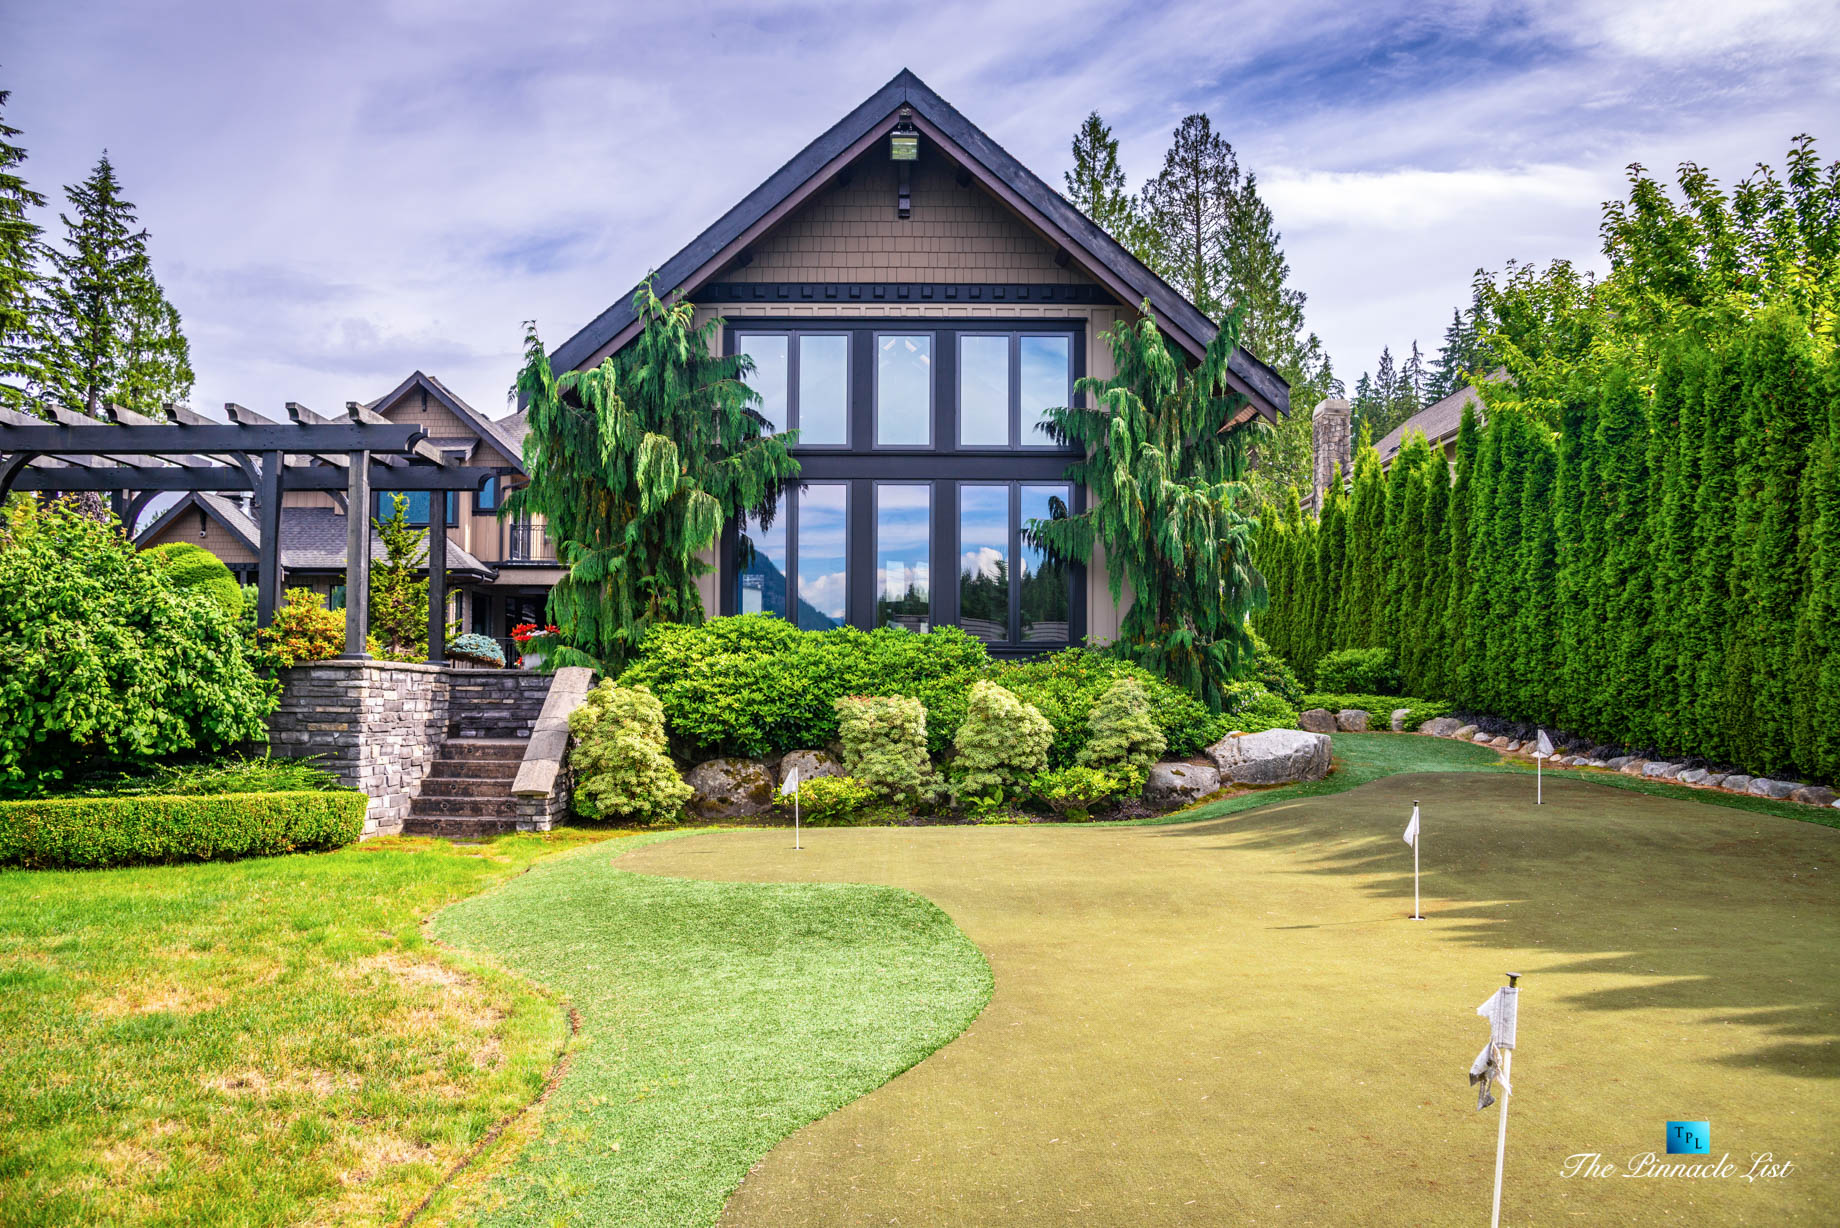 3053 Anmore Creek Way, Anmore, BC, Canada - Backyard Golf Putting Green Landscaping - Luxury Real Estate - Greater Vancouver Home